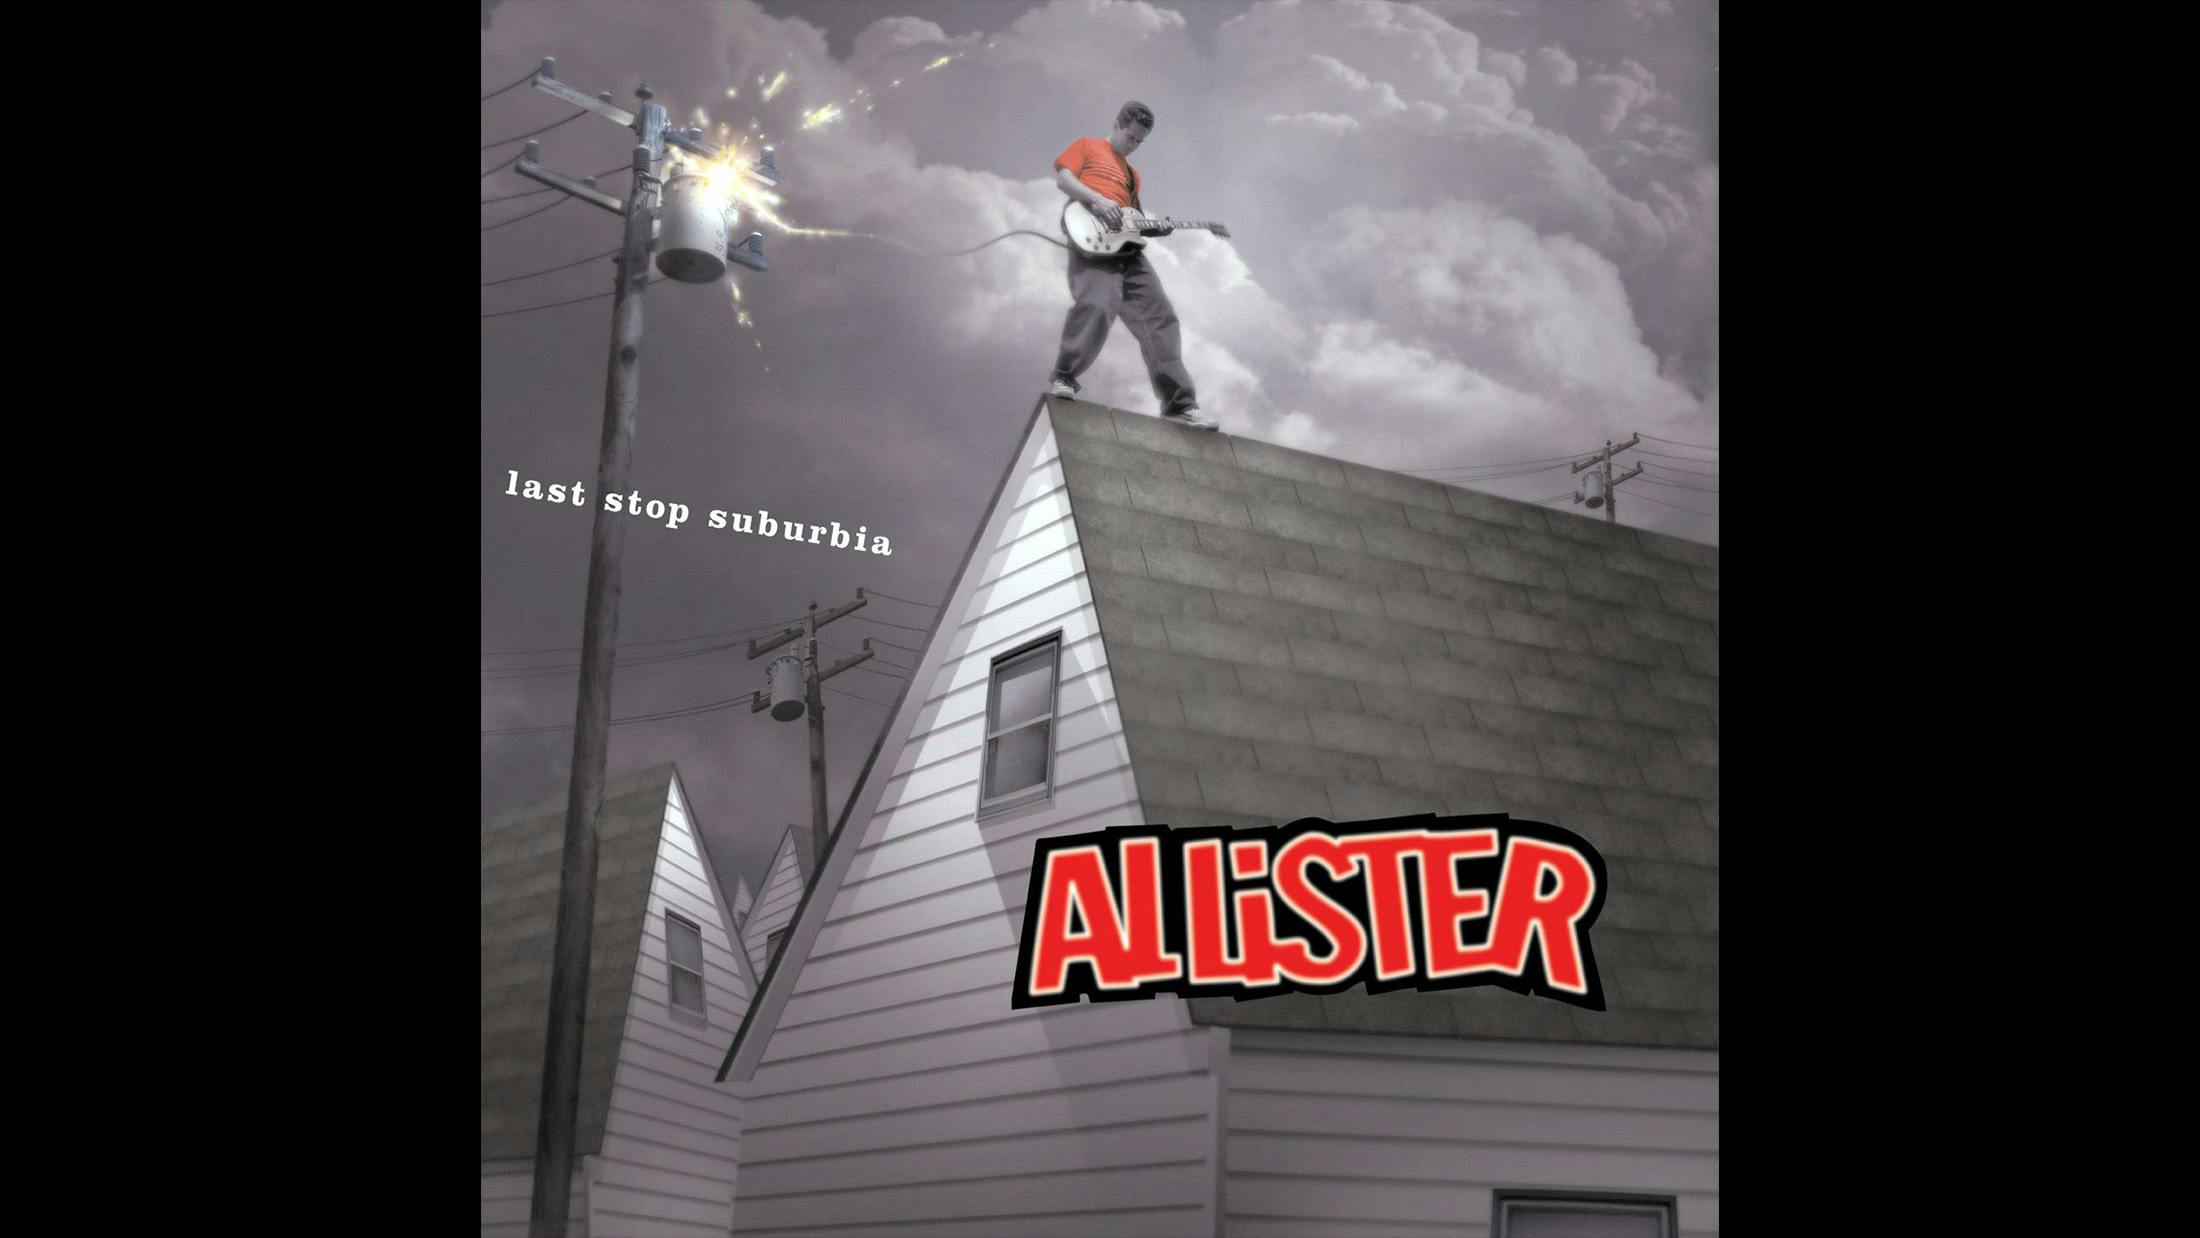 Allister never made it big, like most of the other bands in this list, but the Drive-Thru Records dudes did manage to write a pop-punk album with more bangers than a sausage factory. From Radio Player, to Overrated, to Racecars, to Somewhere On Fullerton, Last Stop Suburbia is 16 tracks of pure teenage joy.